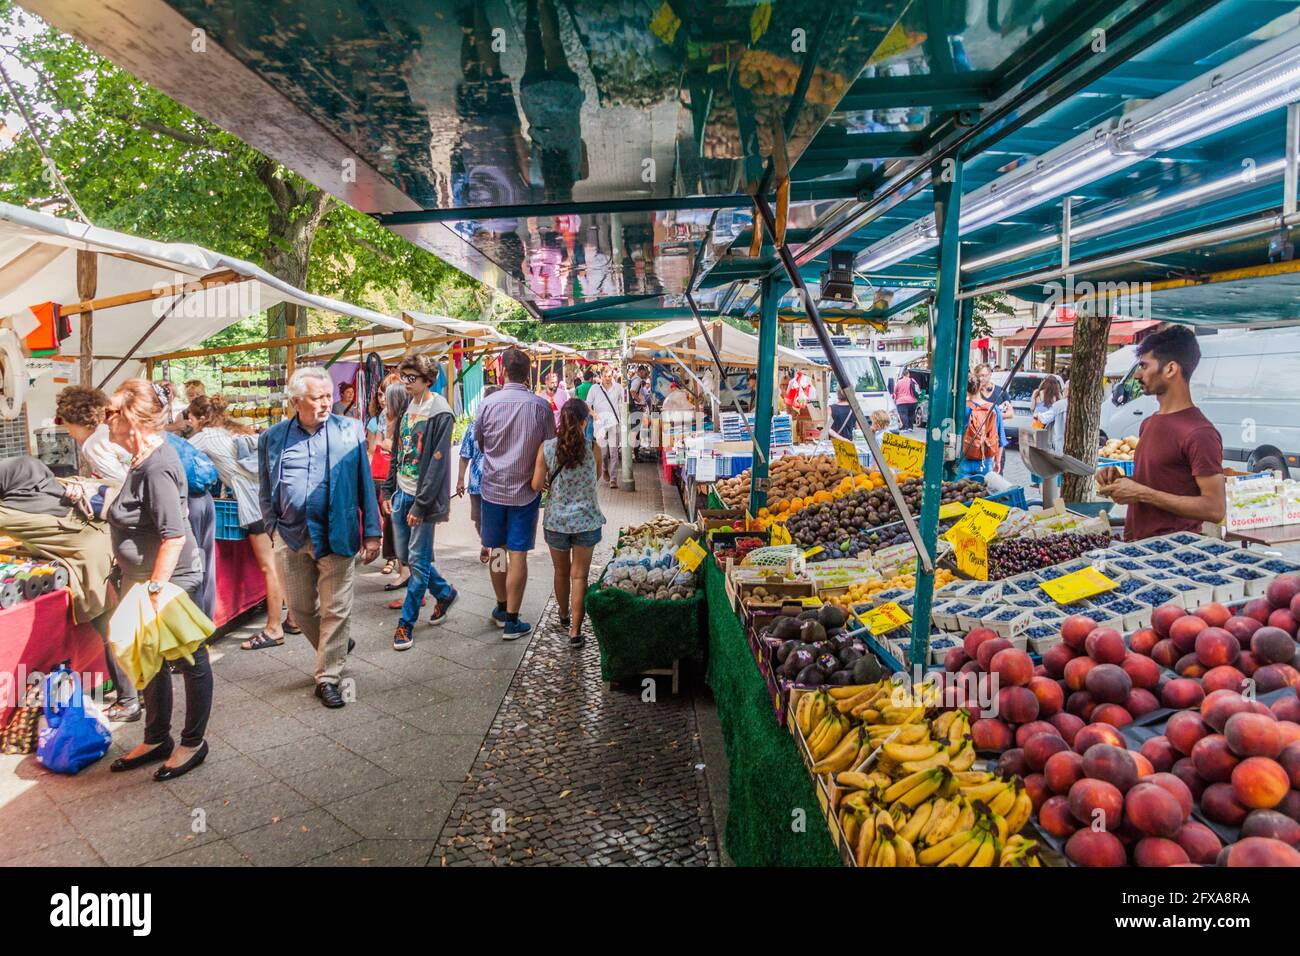 BERLIN, GERMANY - AUGUST 8, 2017: Stalls of the Turkish Market in Berlin. Stock Photo